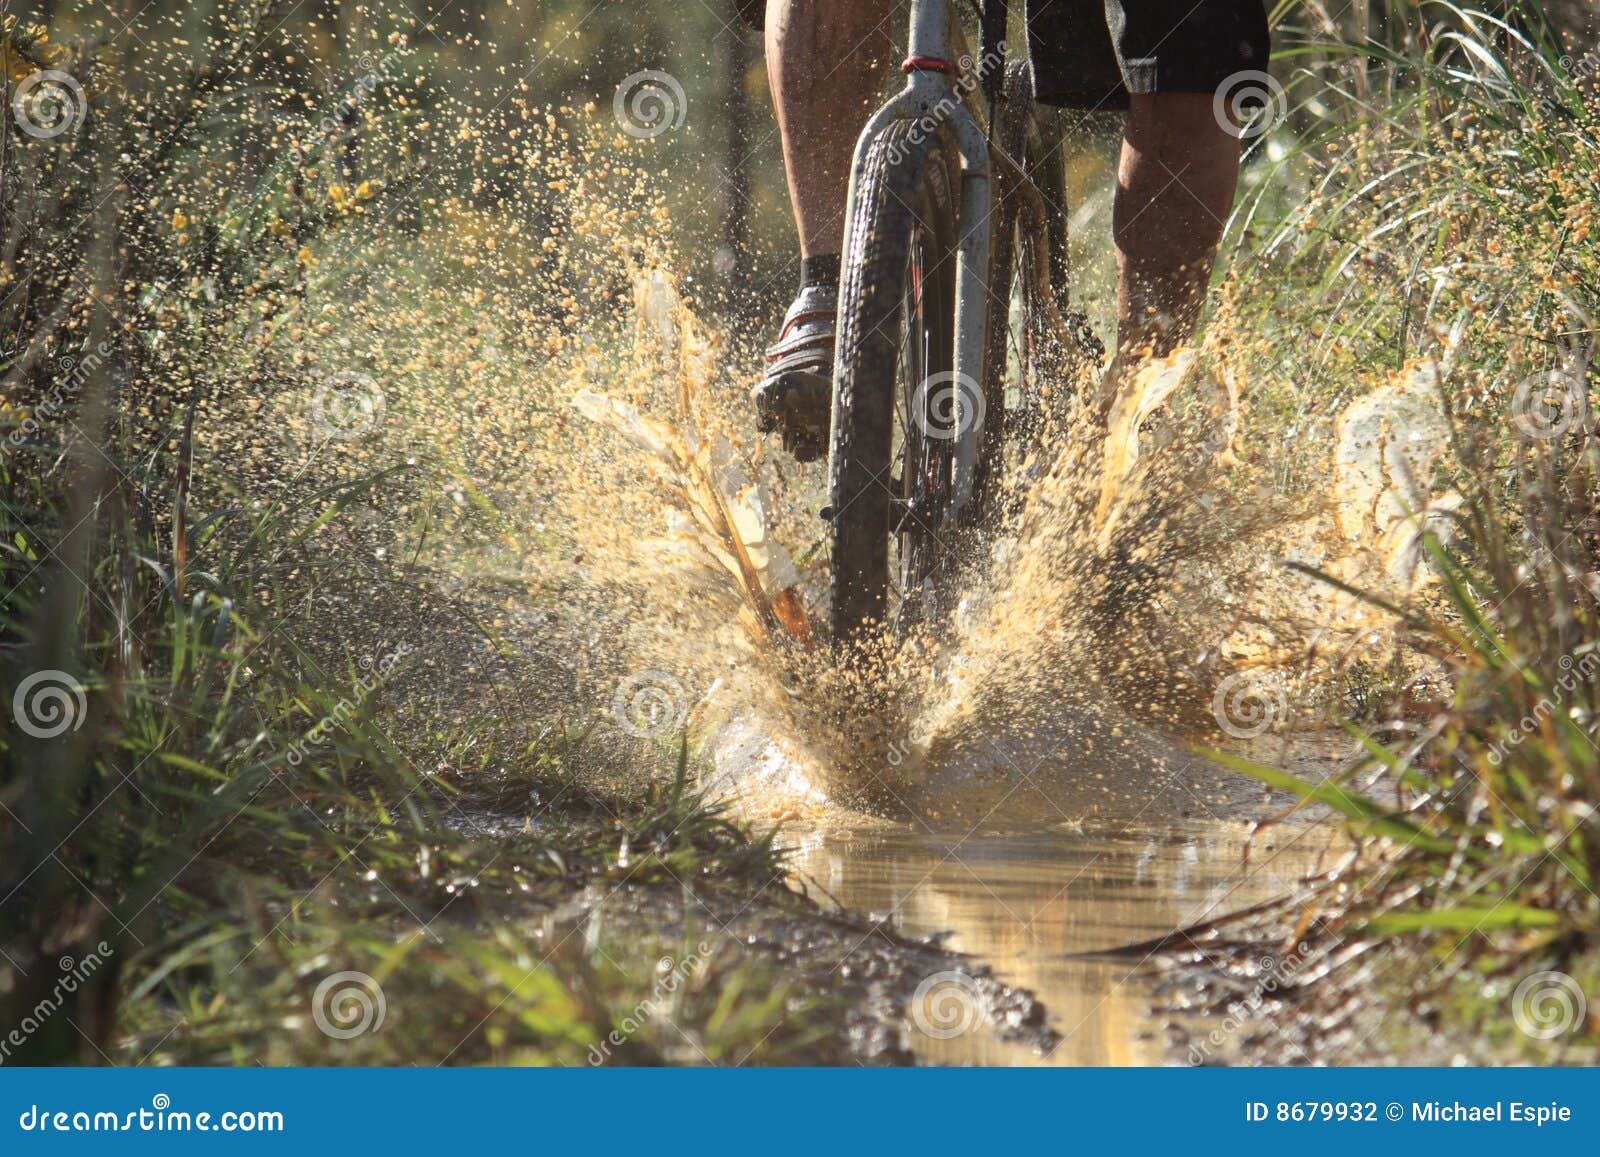 Riding Through Mud stock photo. Image of excitment, track - 8679932